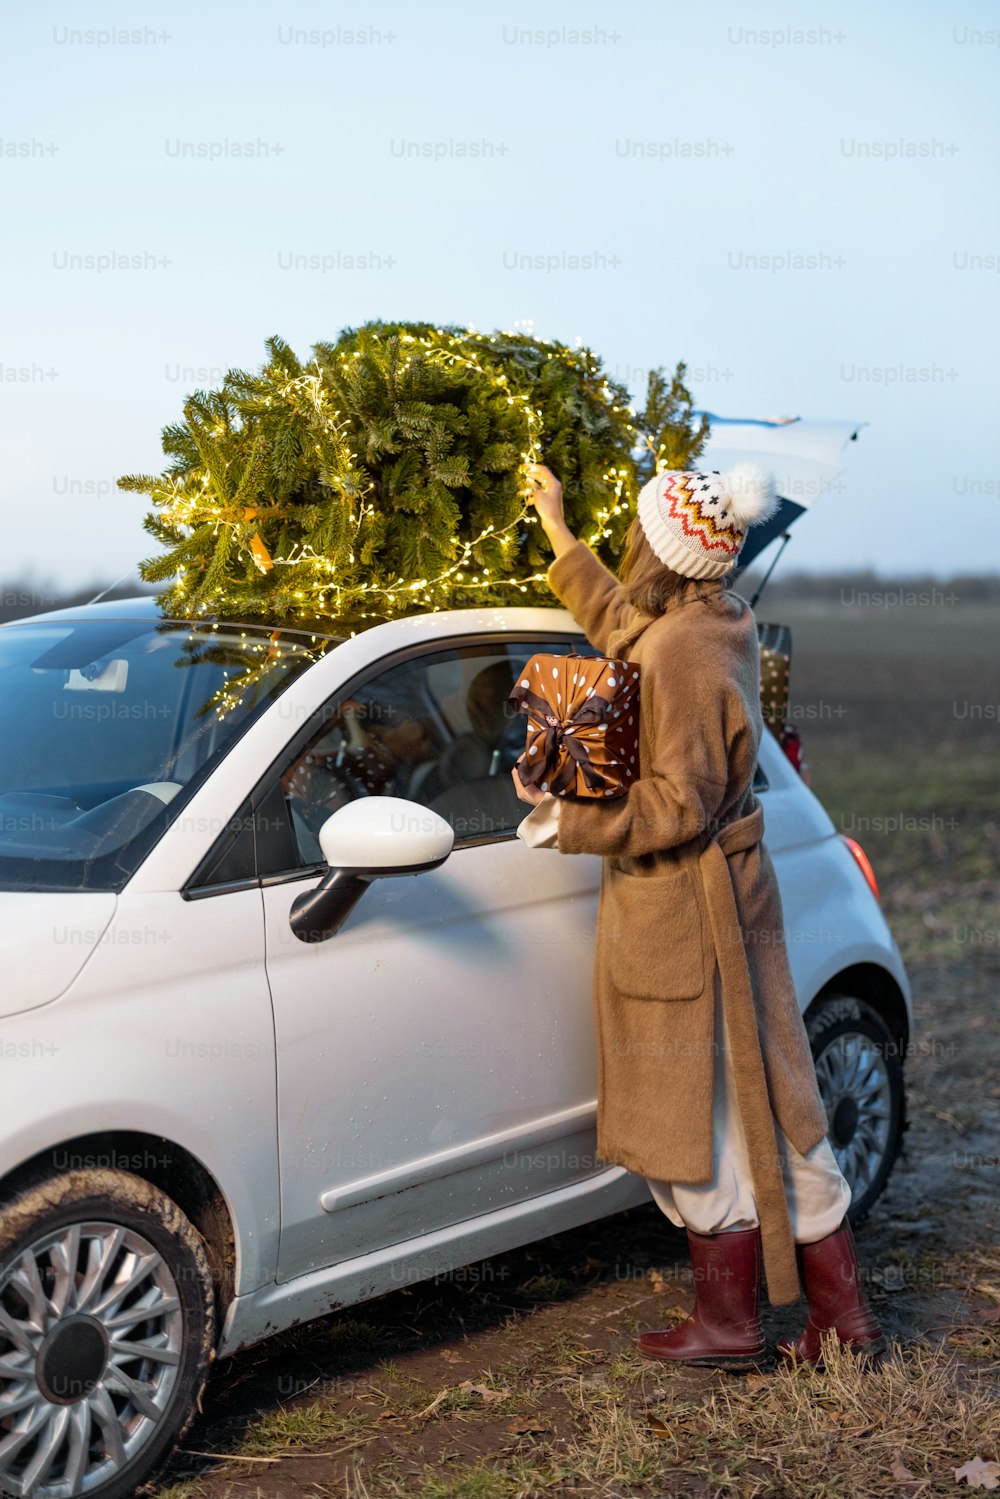 Woman packing Christmas tree on a rooftop of her car, getting ready for a holidays. Idea of Christmas mood and celebration. Woman wearing fur coat and hat. Evening with beautiful sunset sky